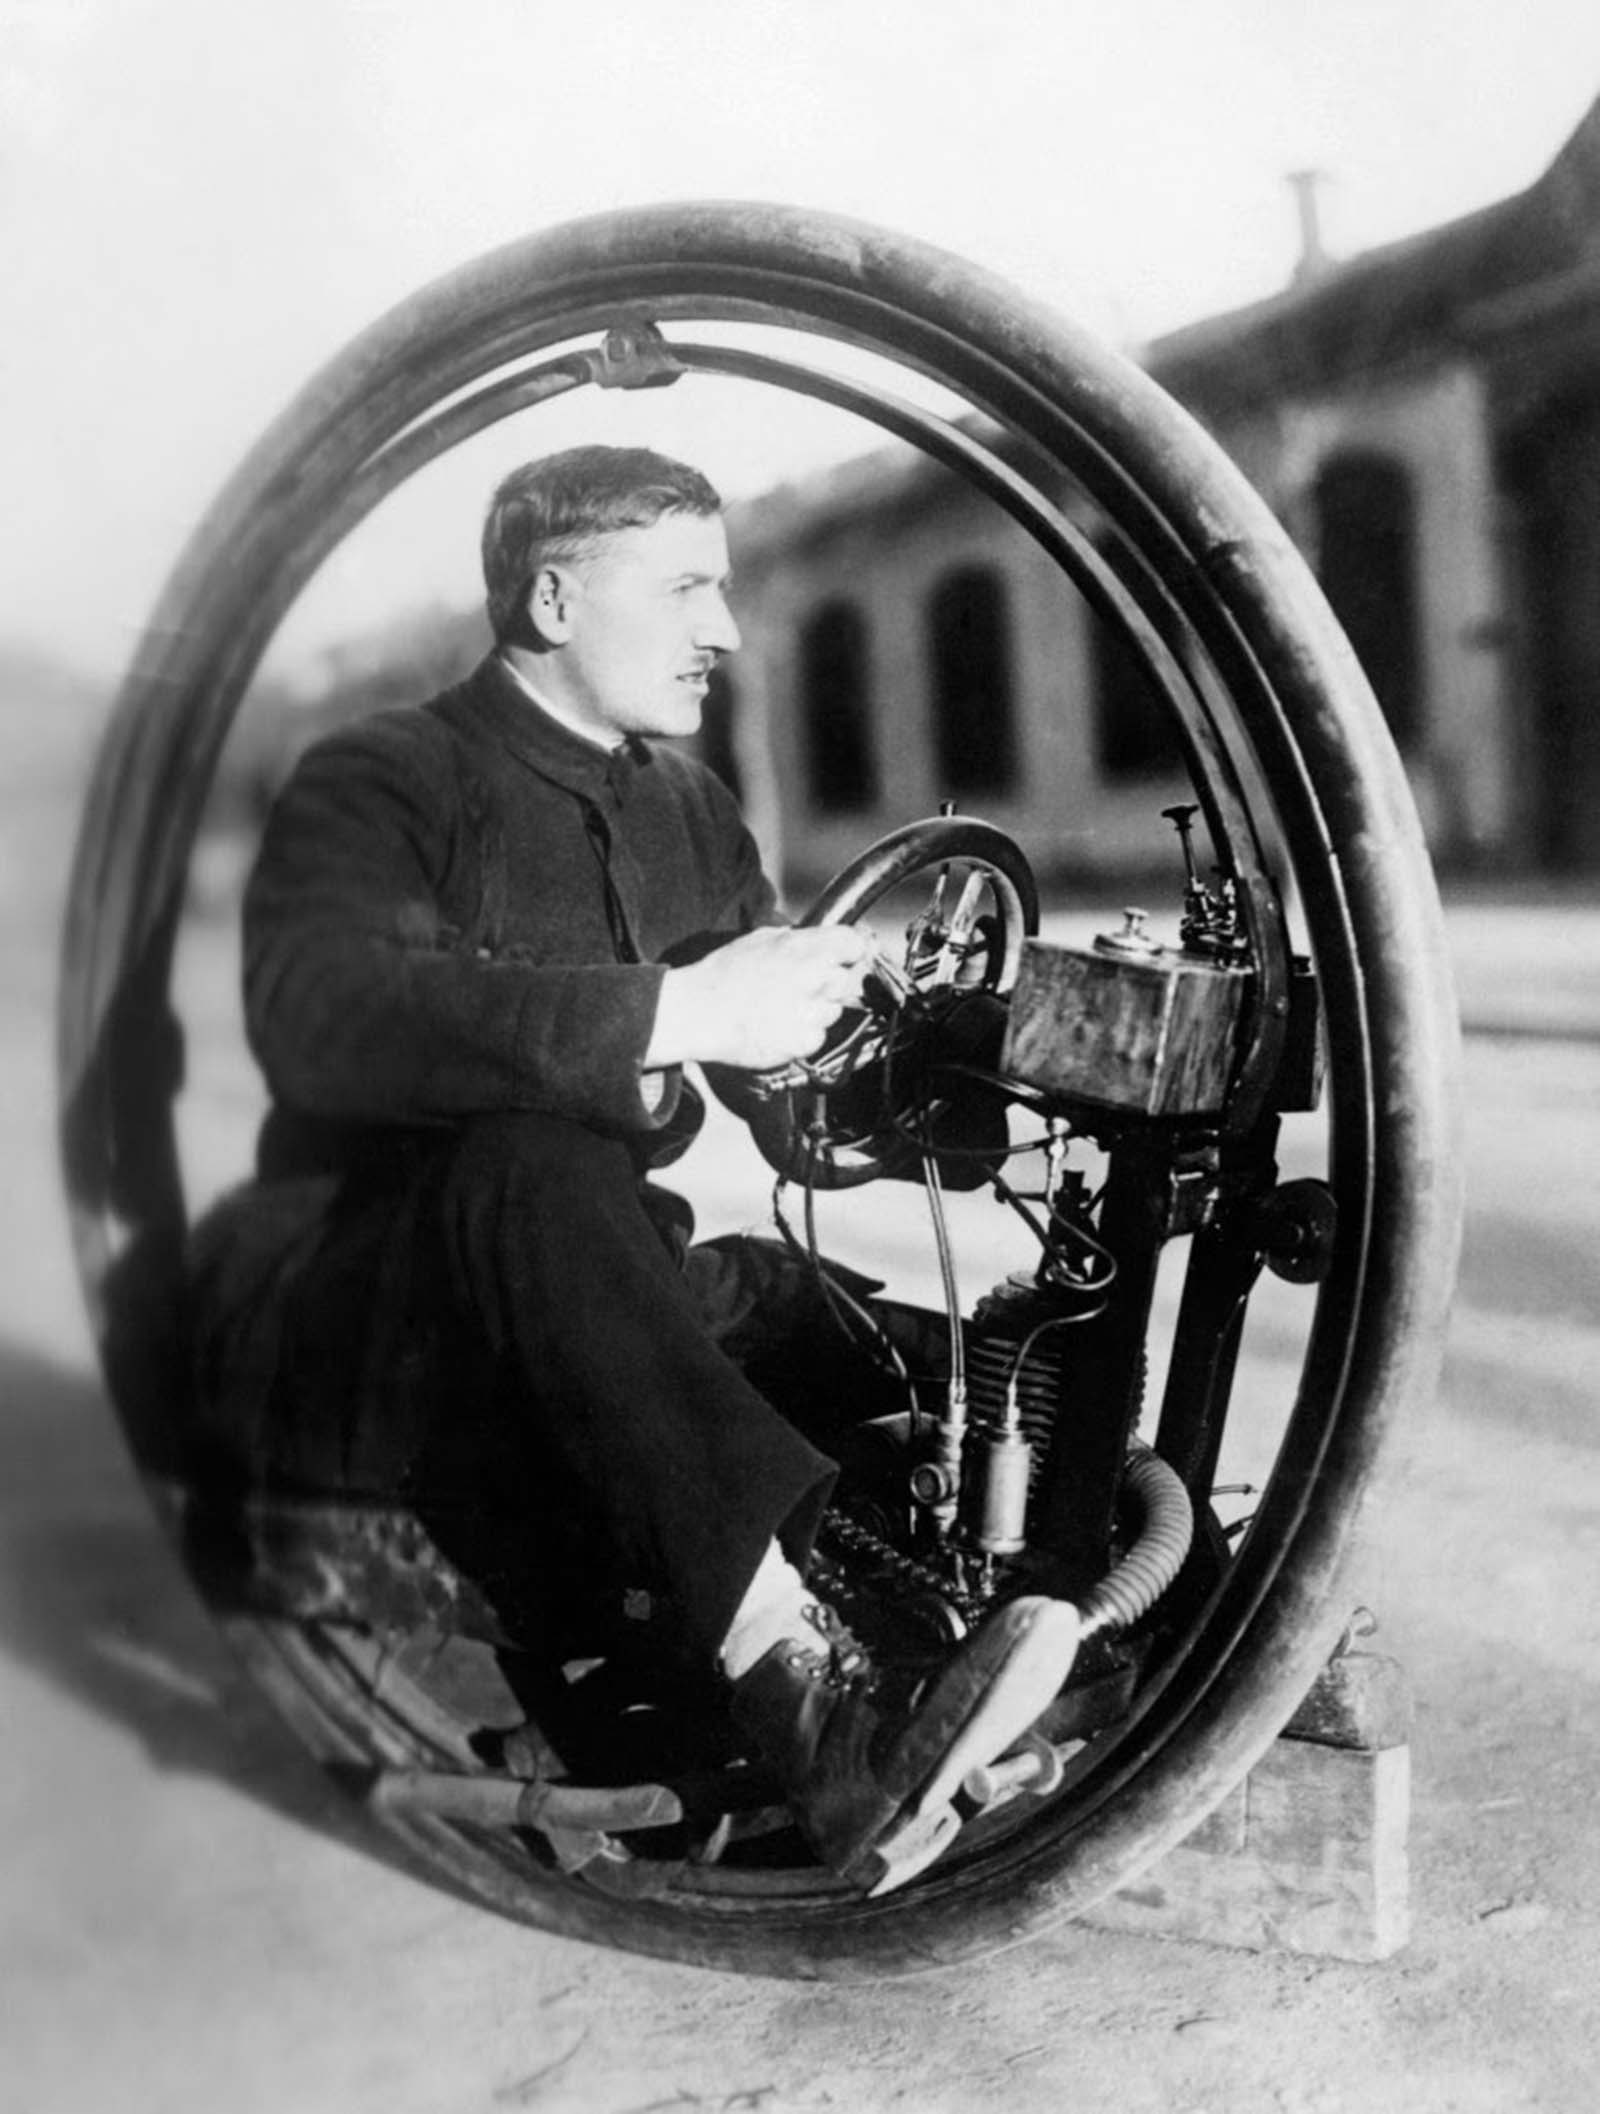 Signor Davide Cislaghi with his one wheel motorcycle called the “Monowheel” which was capable of speeds up to 40 mph, 1923.